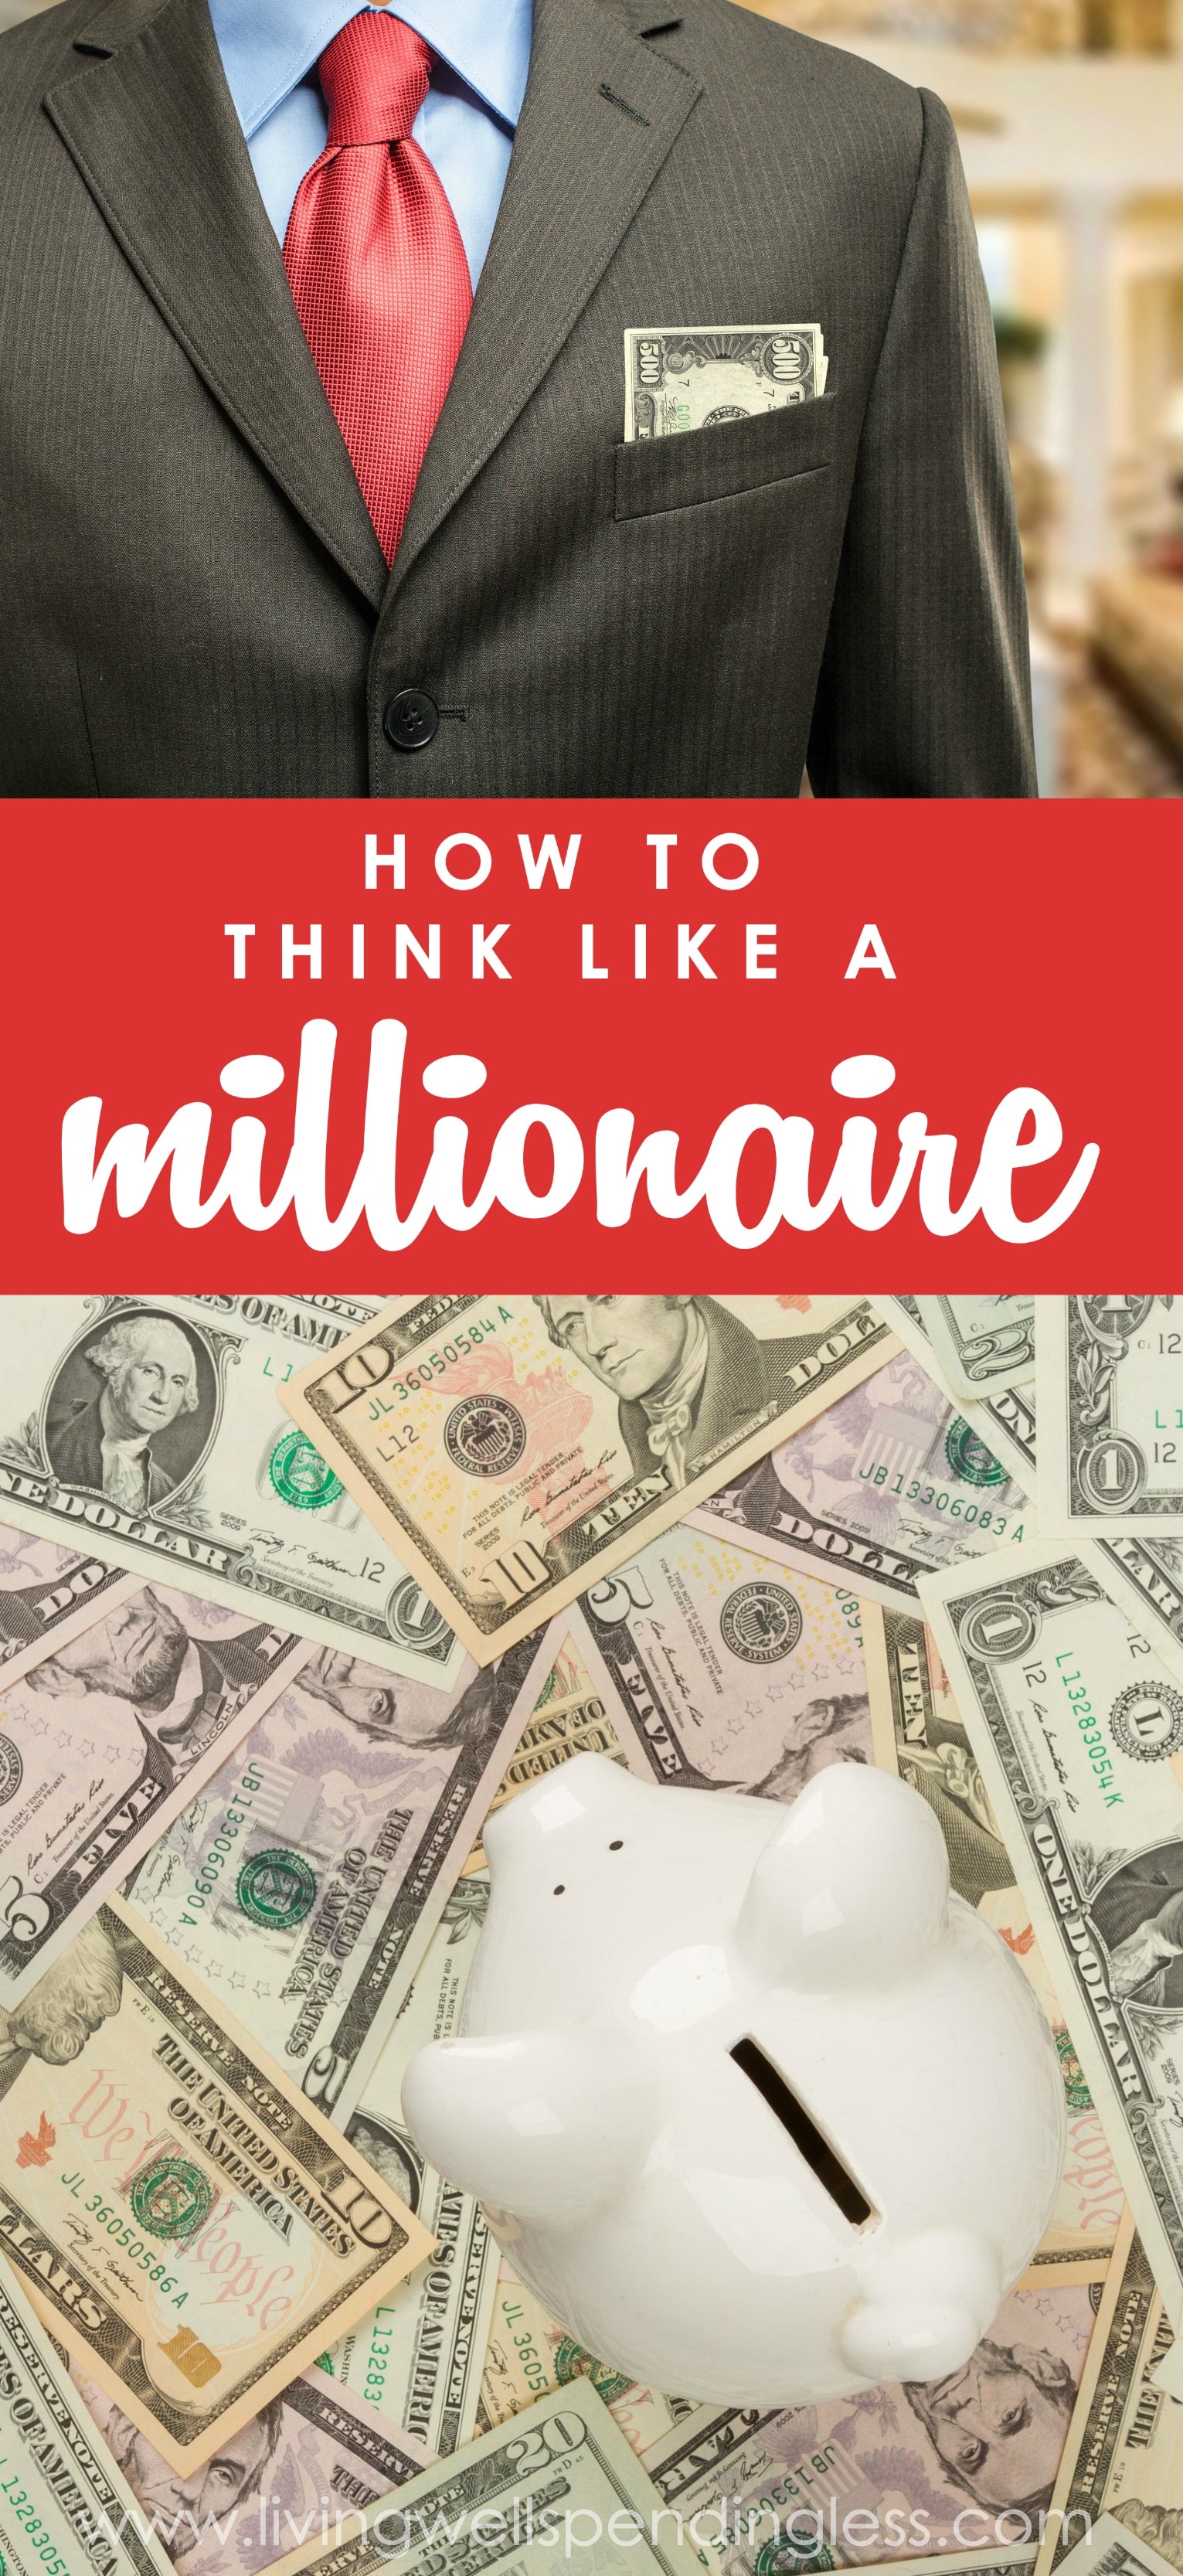 How To Think Like A Millionaire 5 Smart Things Rich People Do - 